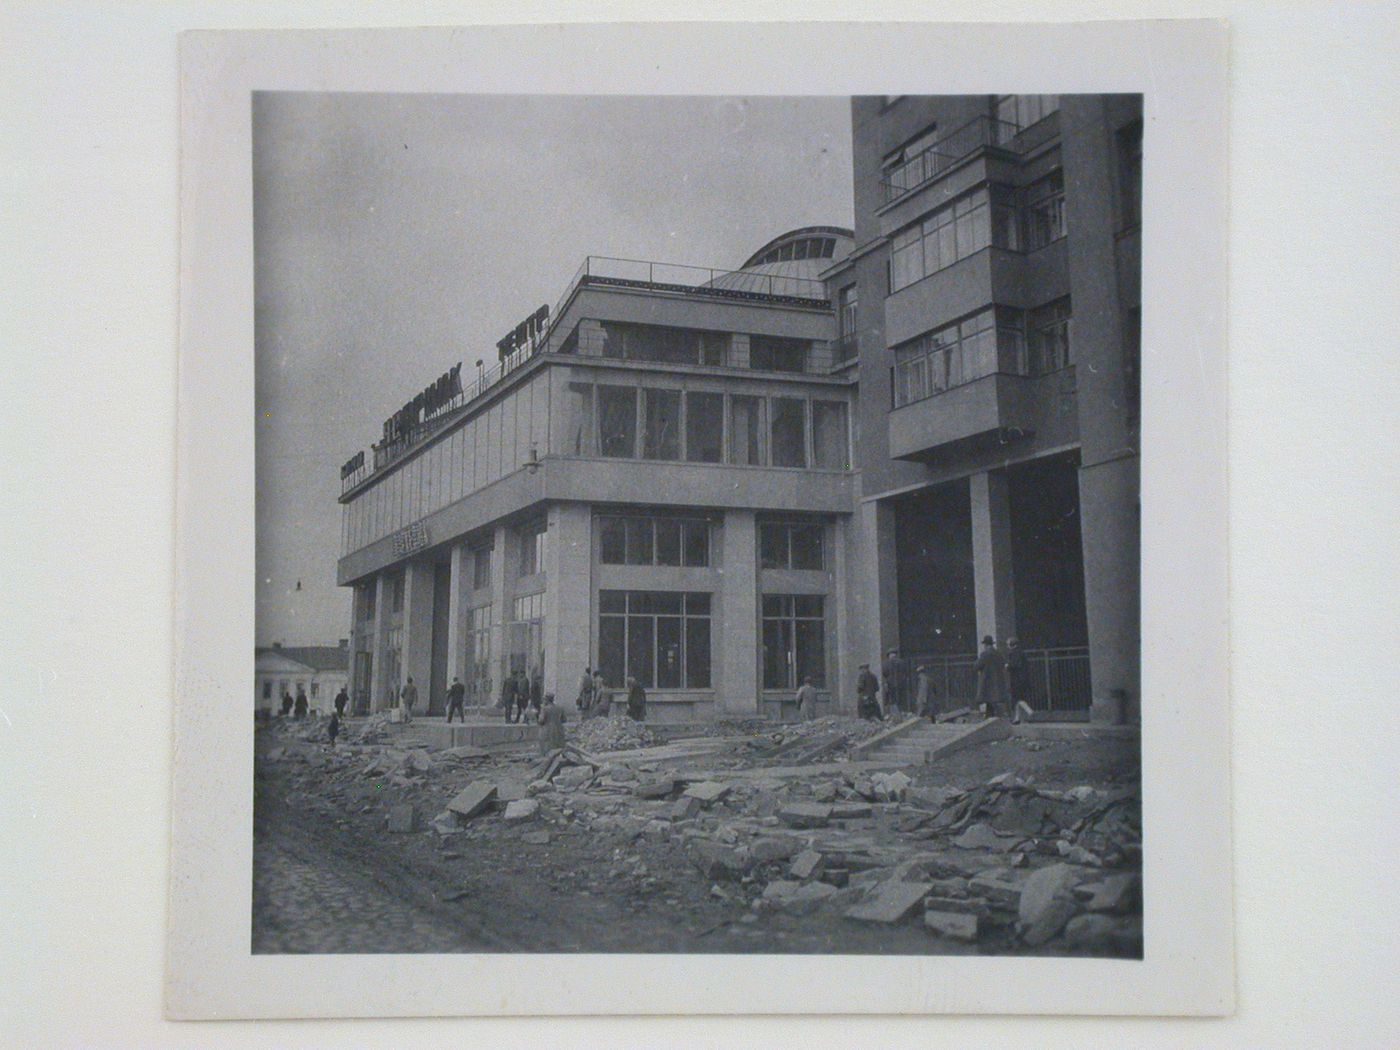 Exterior view of Udarnik Cinema under construction, Moscow